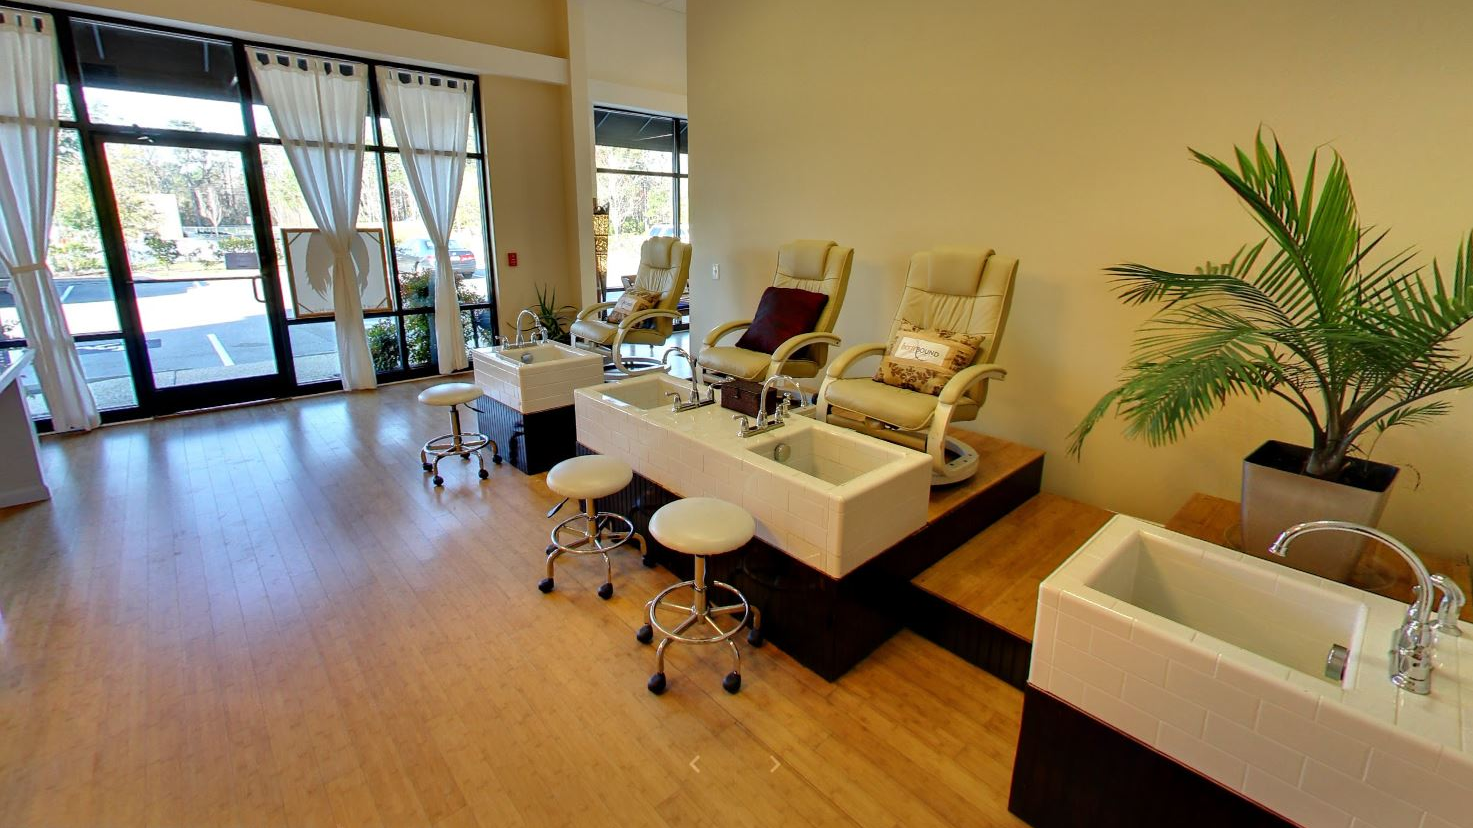 earthBOUND Salon and Day Spa